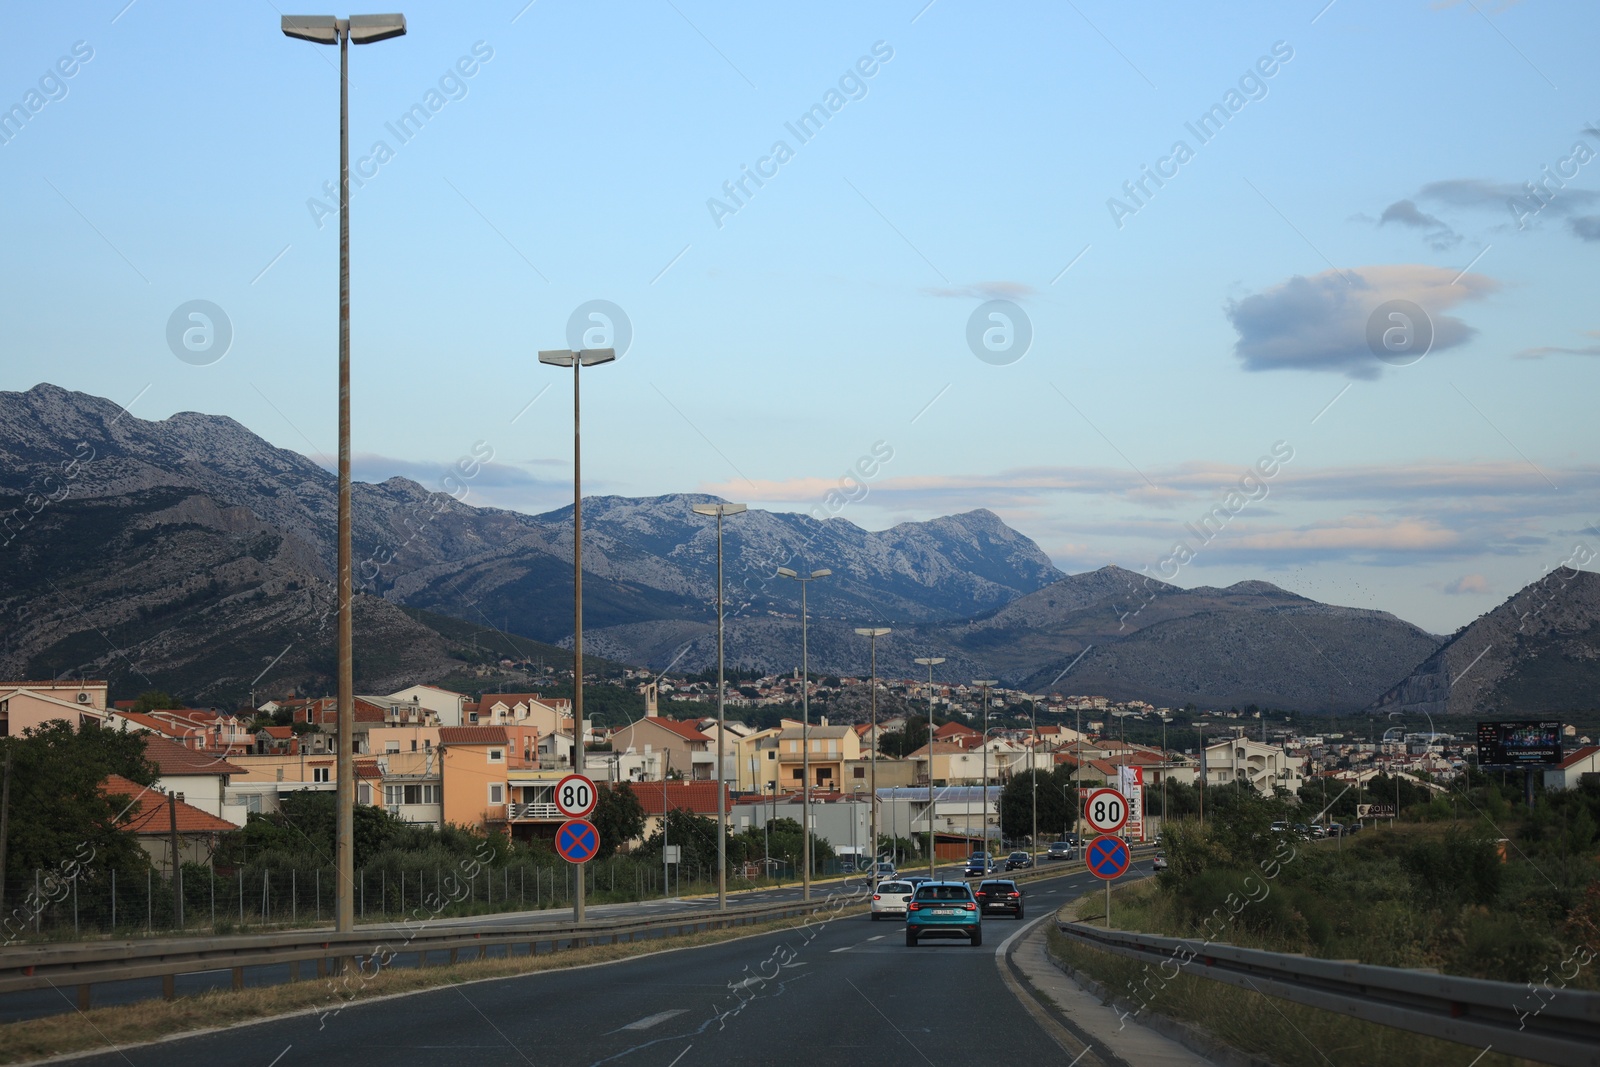 Photo of Picturesque view of mountains and highway with cars in city